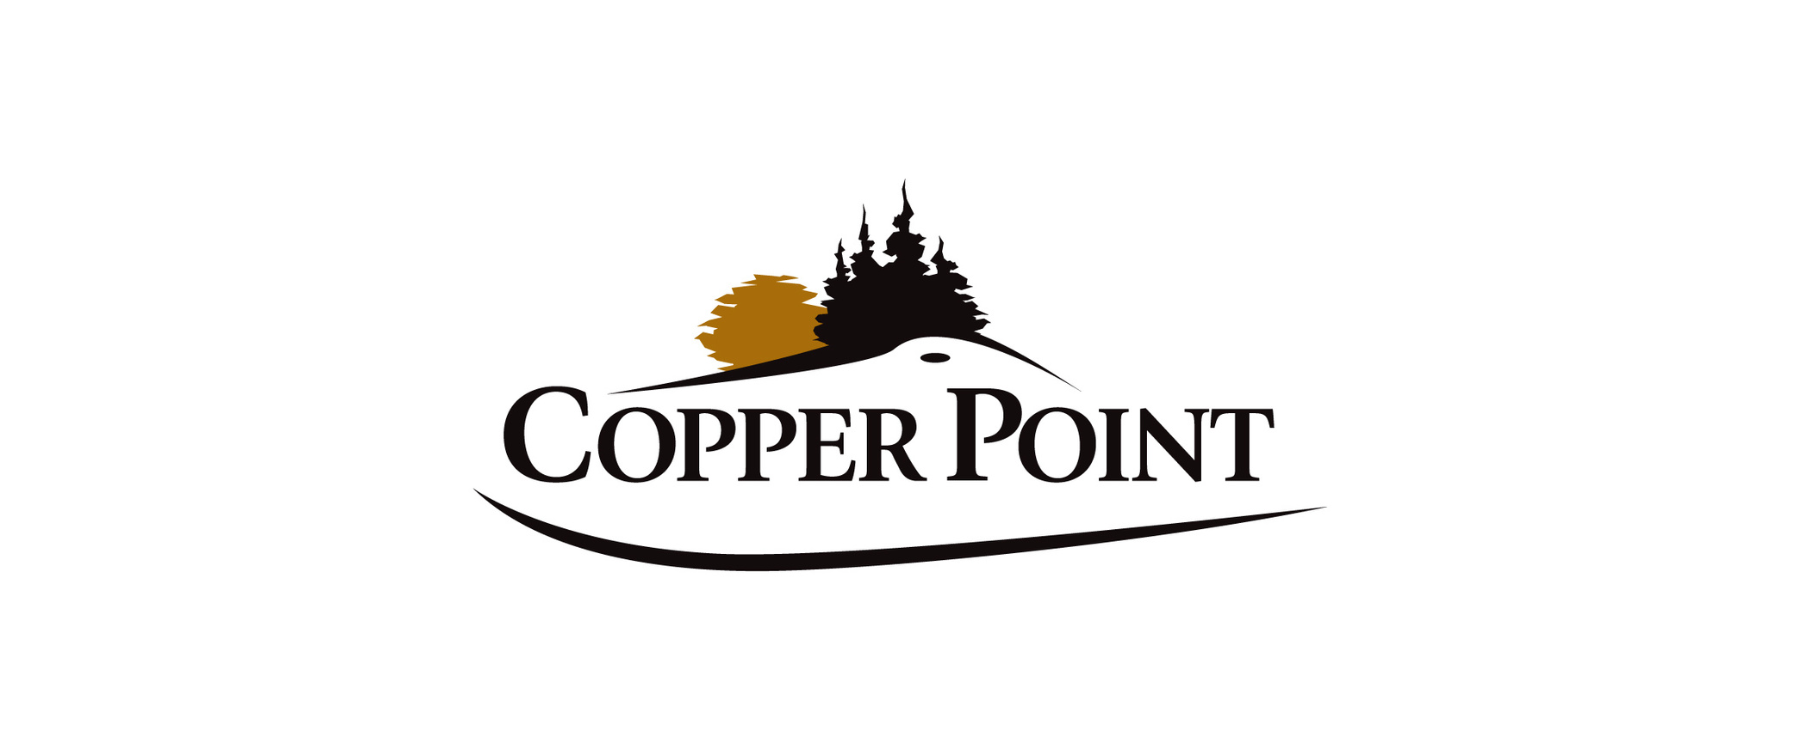 Copper Point